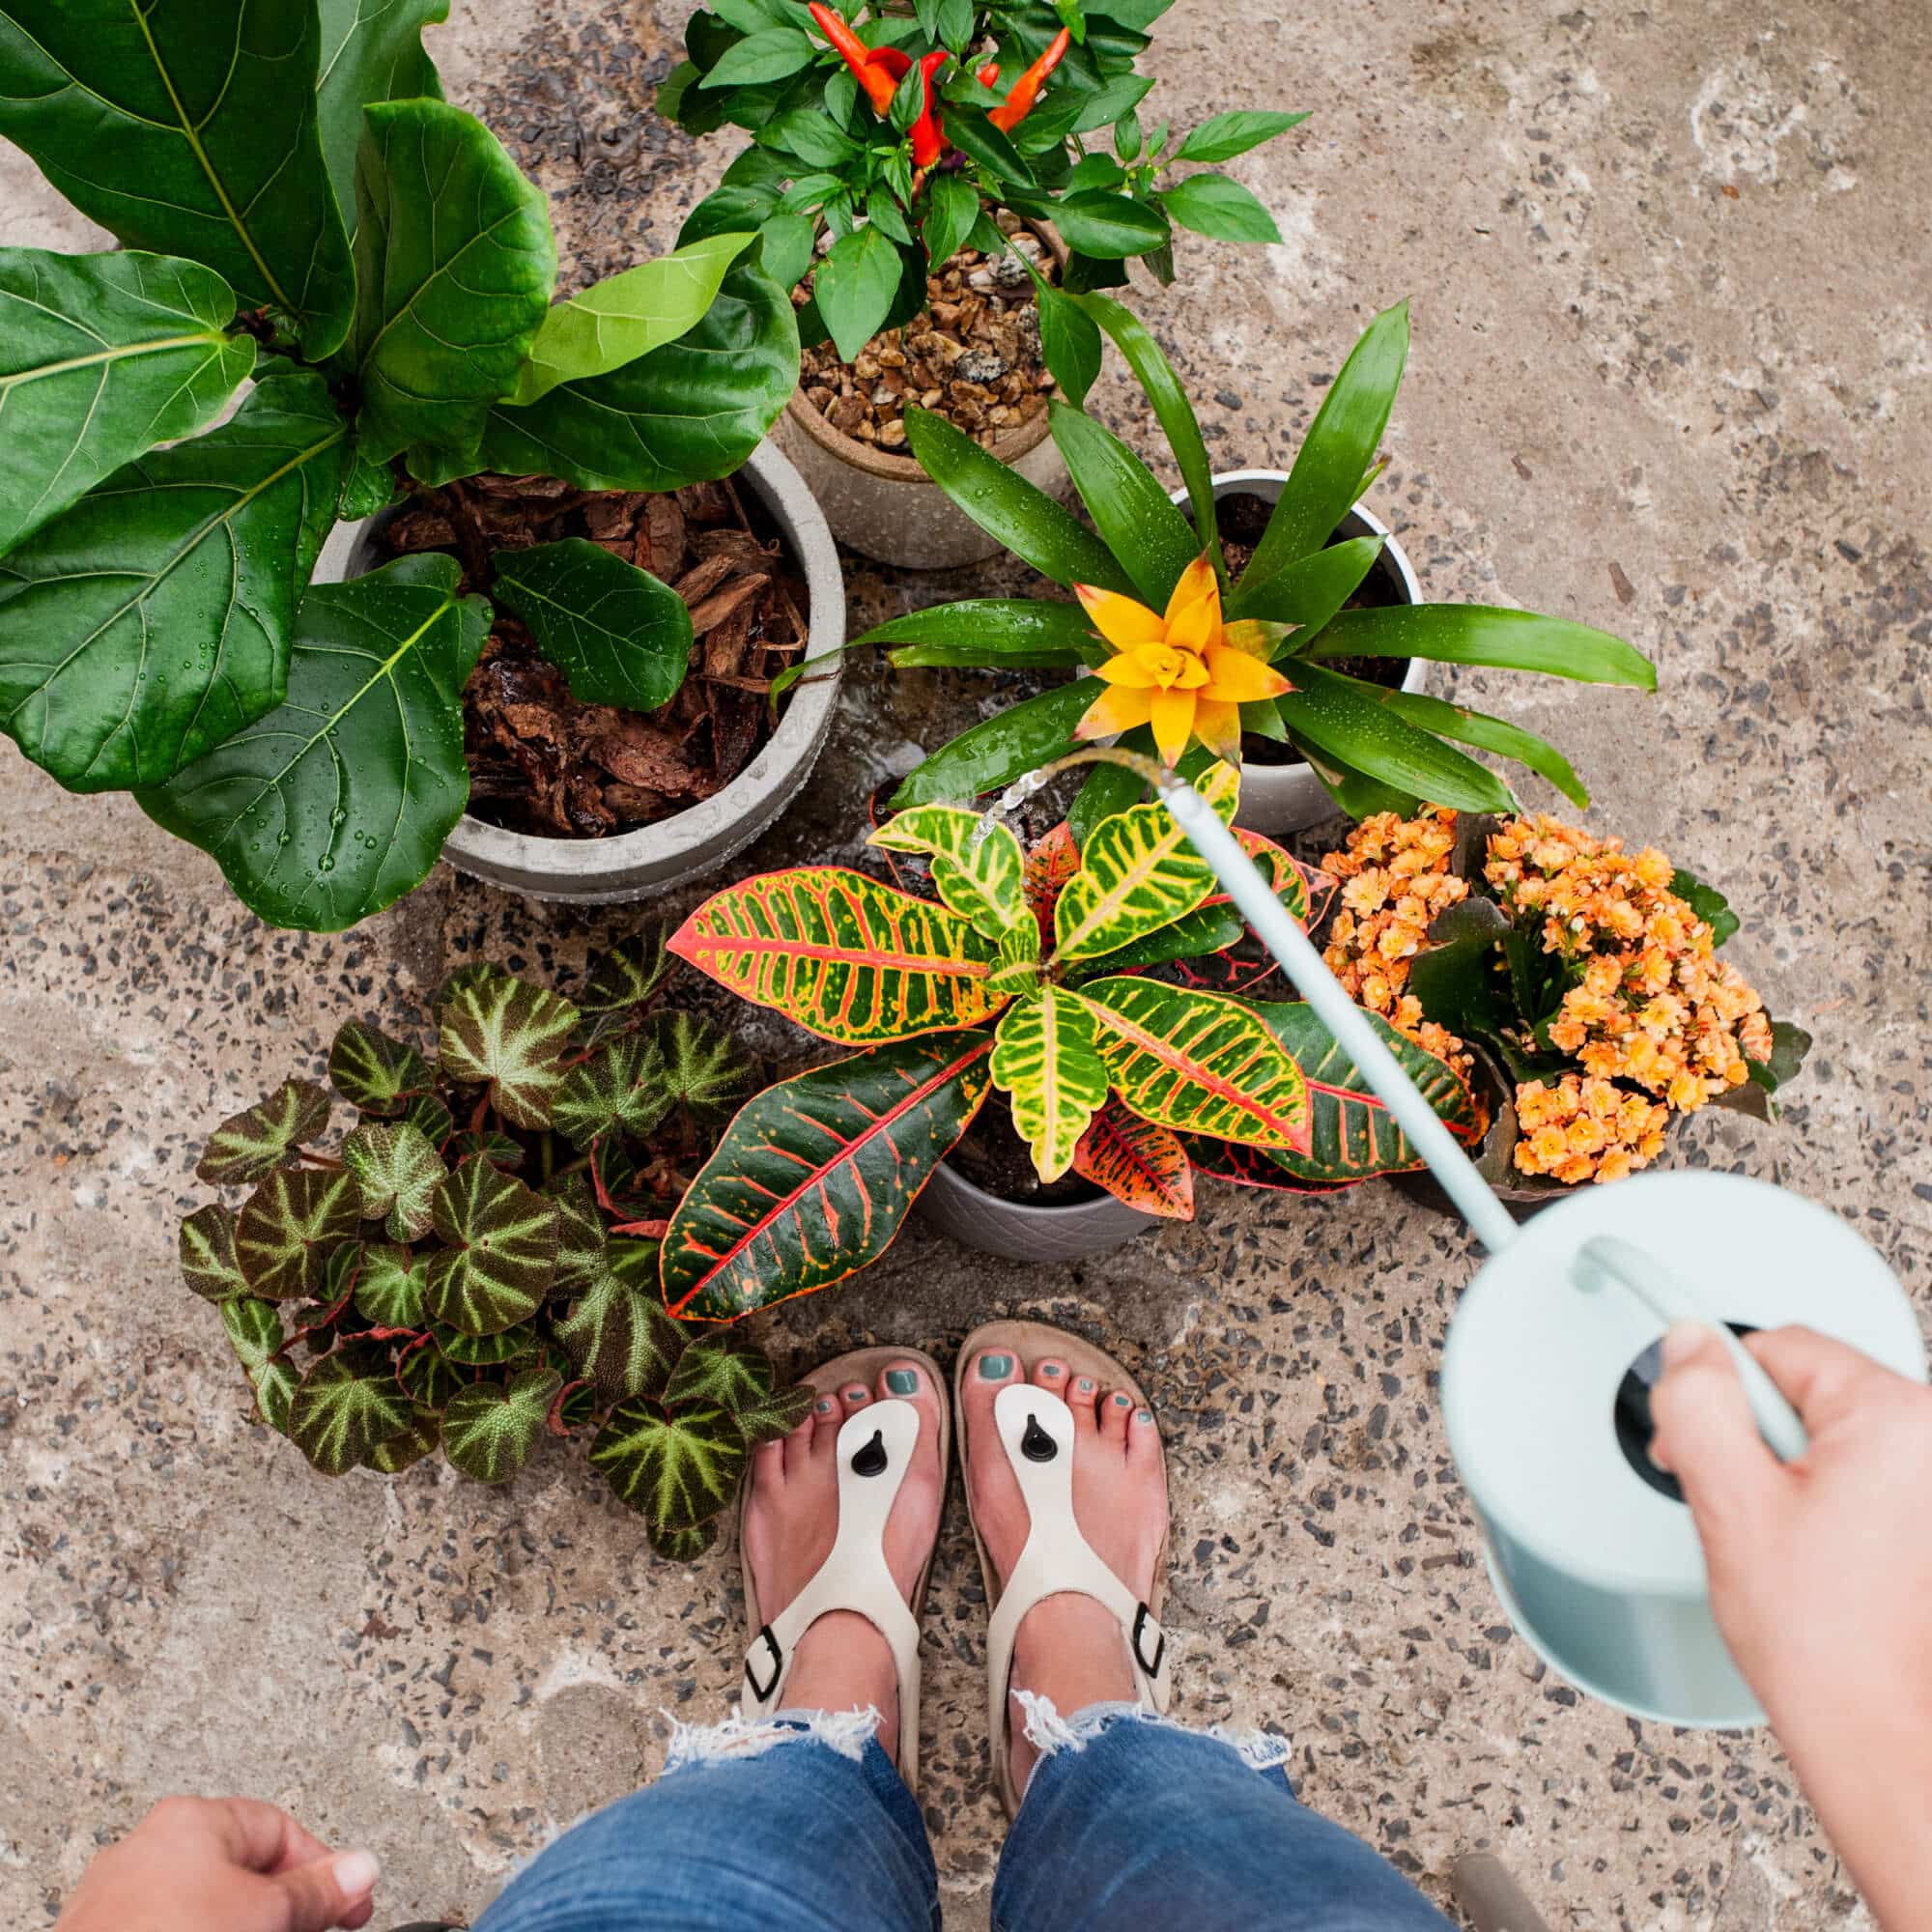 A person's feet in thong sandals, standing amidst colourful potted plants and a plastic watering can.